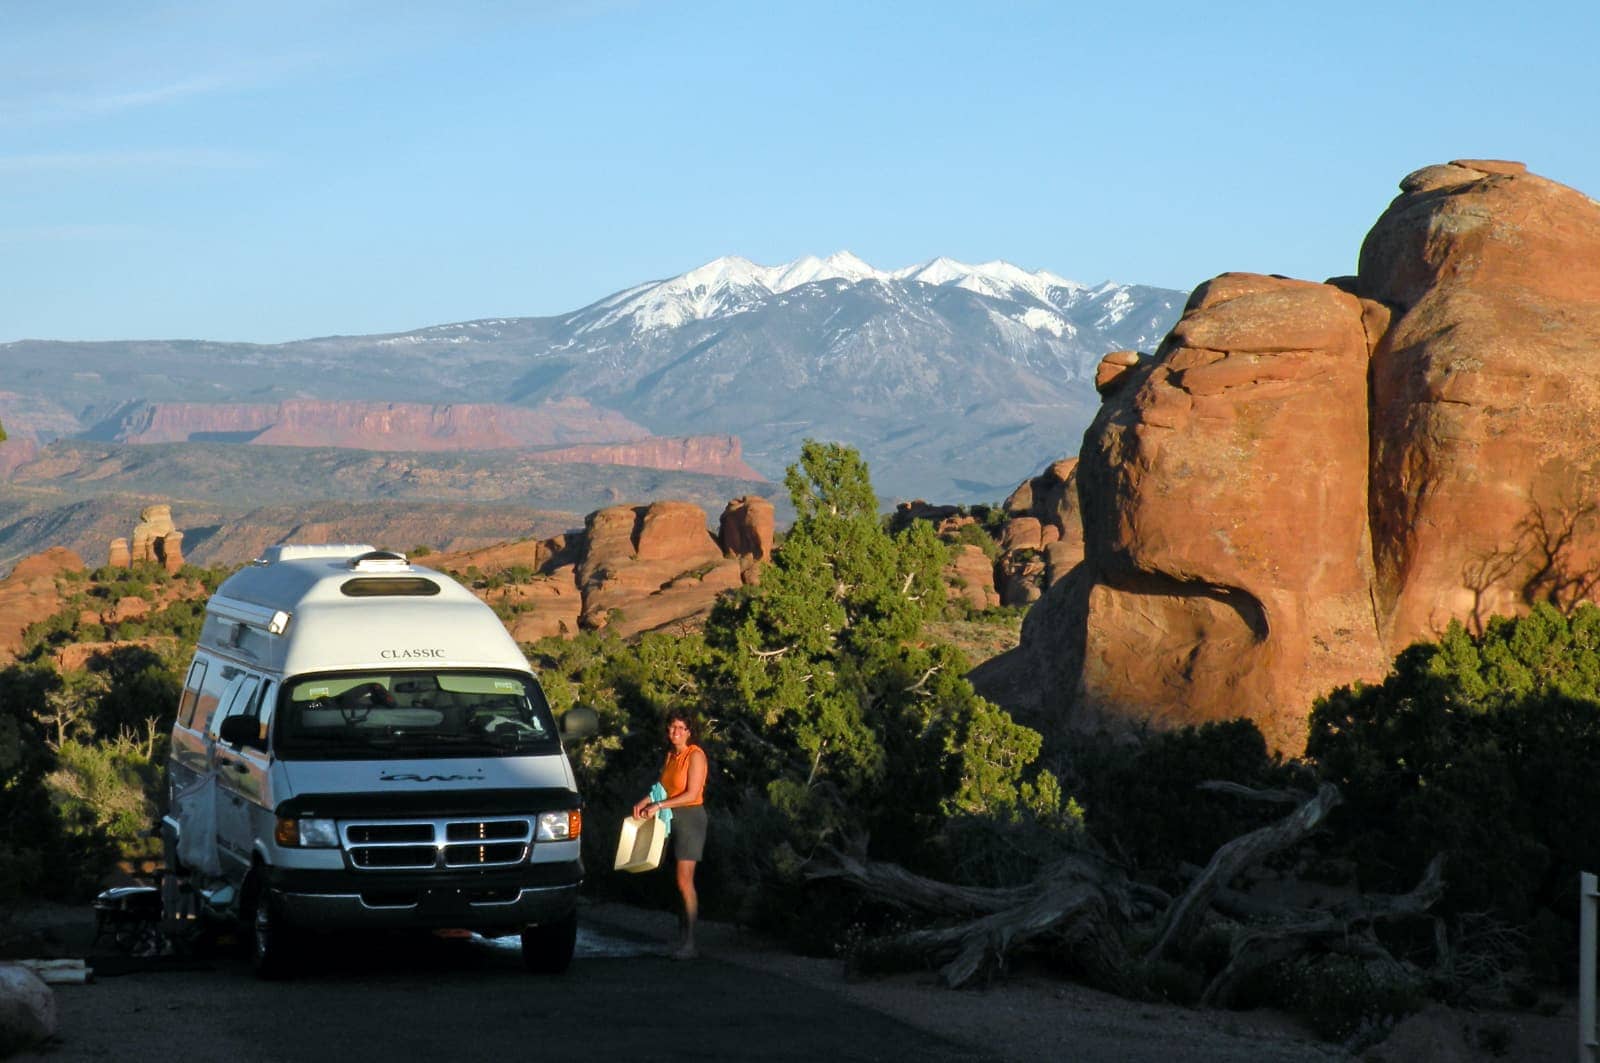 Woman and white camper van in foreground with mountains and blue sky in background